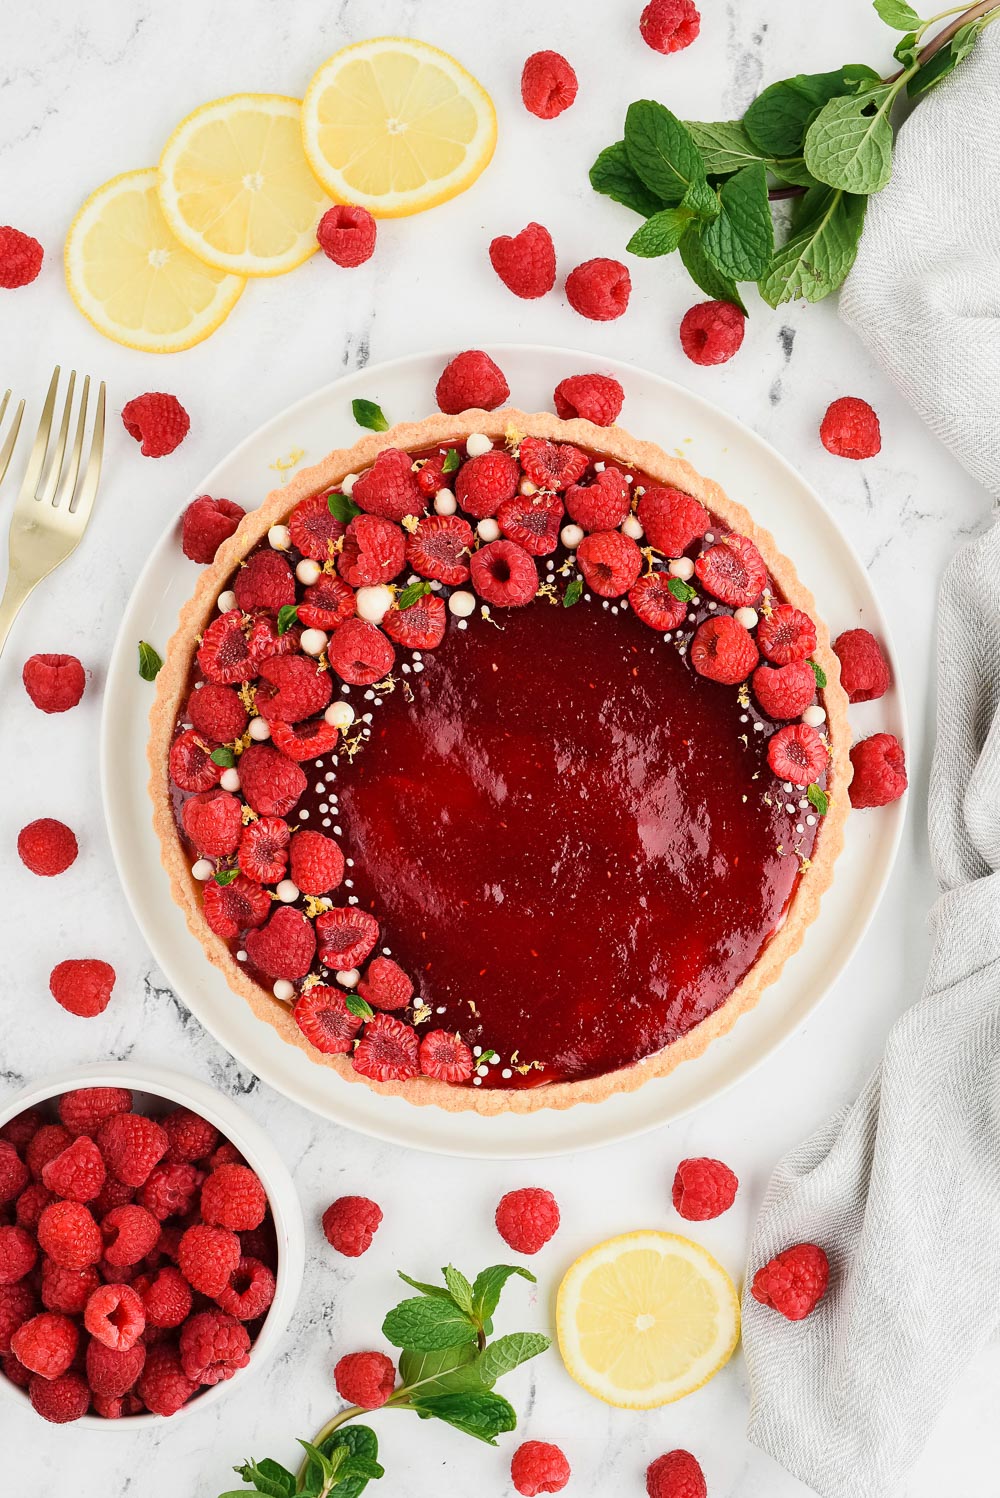 Raspberry fruit tart on a white plate with raspberries, mint leaves, lemon slices and gold forks on the side.